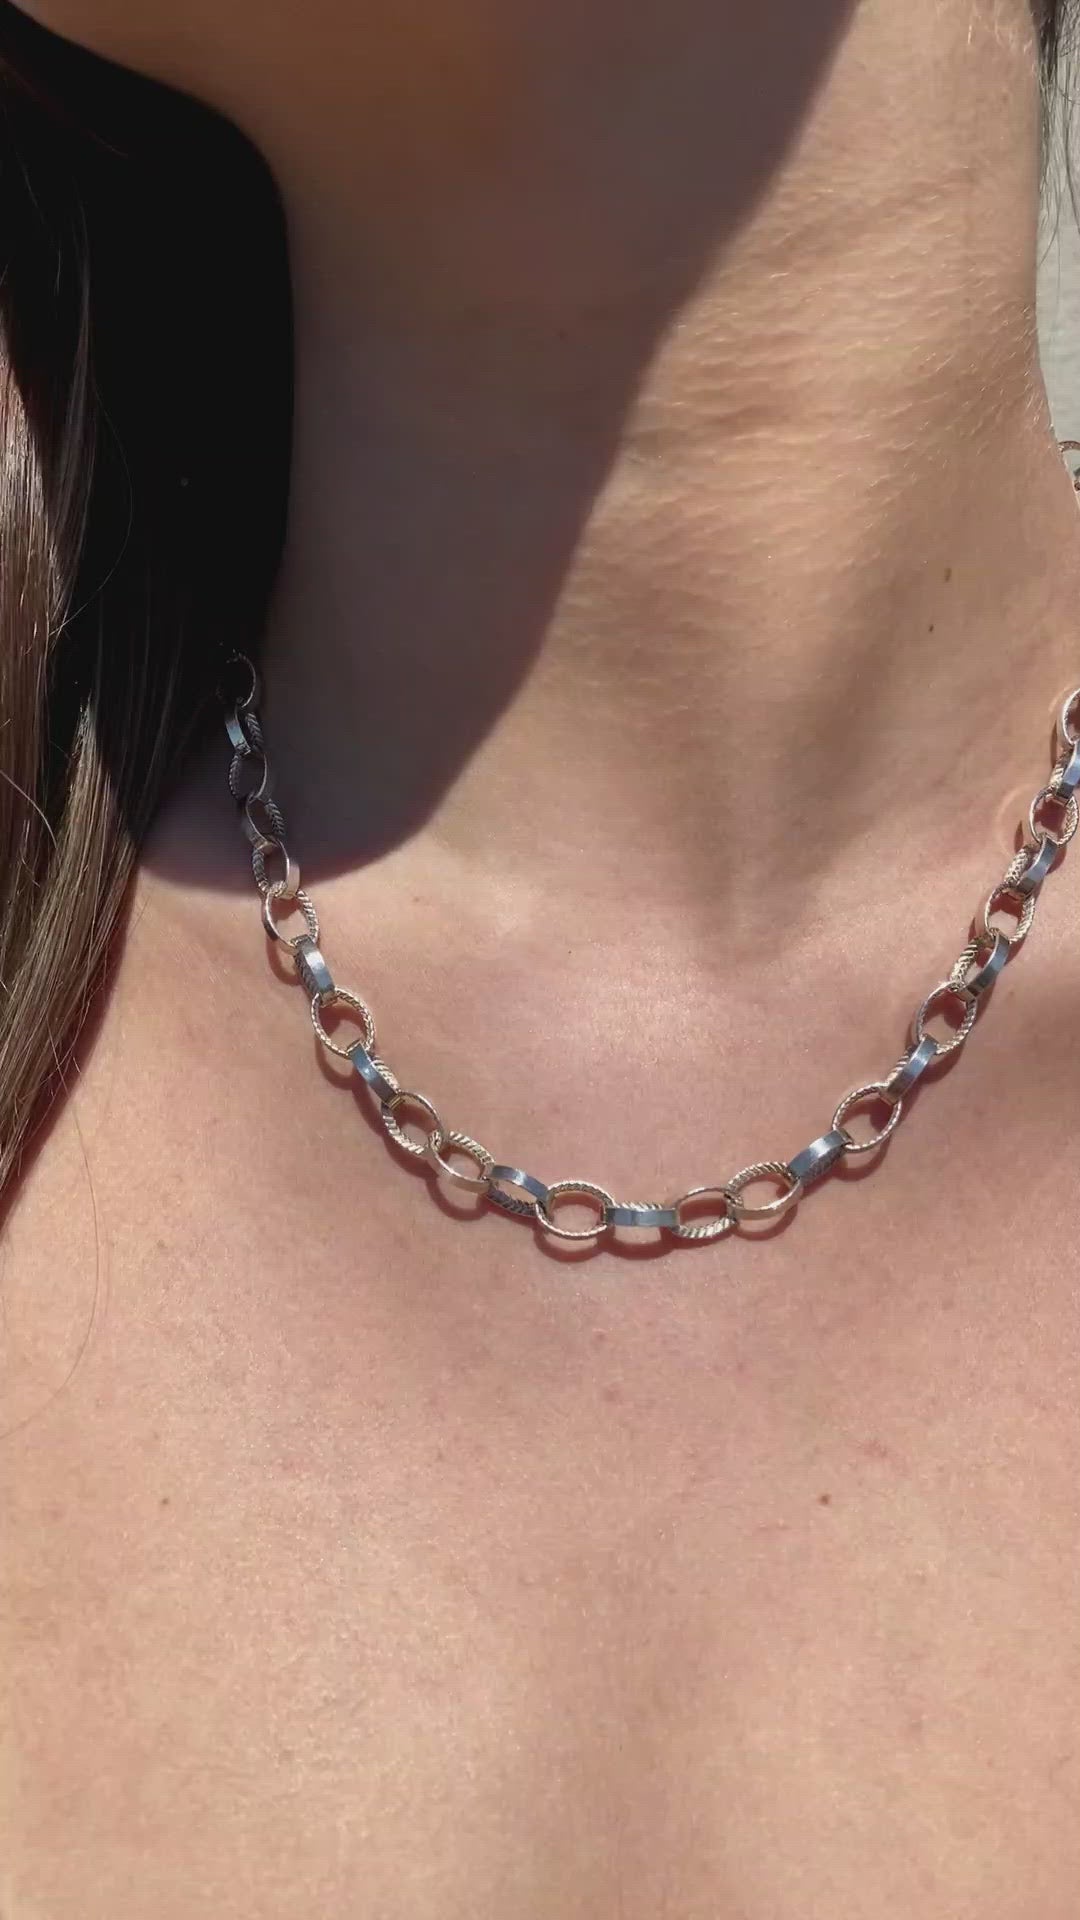 STERLING SILVER BRAIDED TEXTURE OVAL LINK NECKLACE - CAMILLE JEWELRY